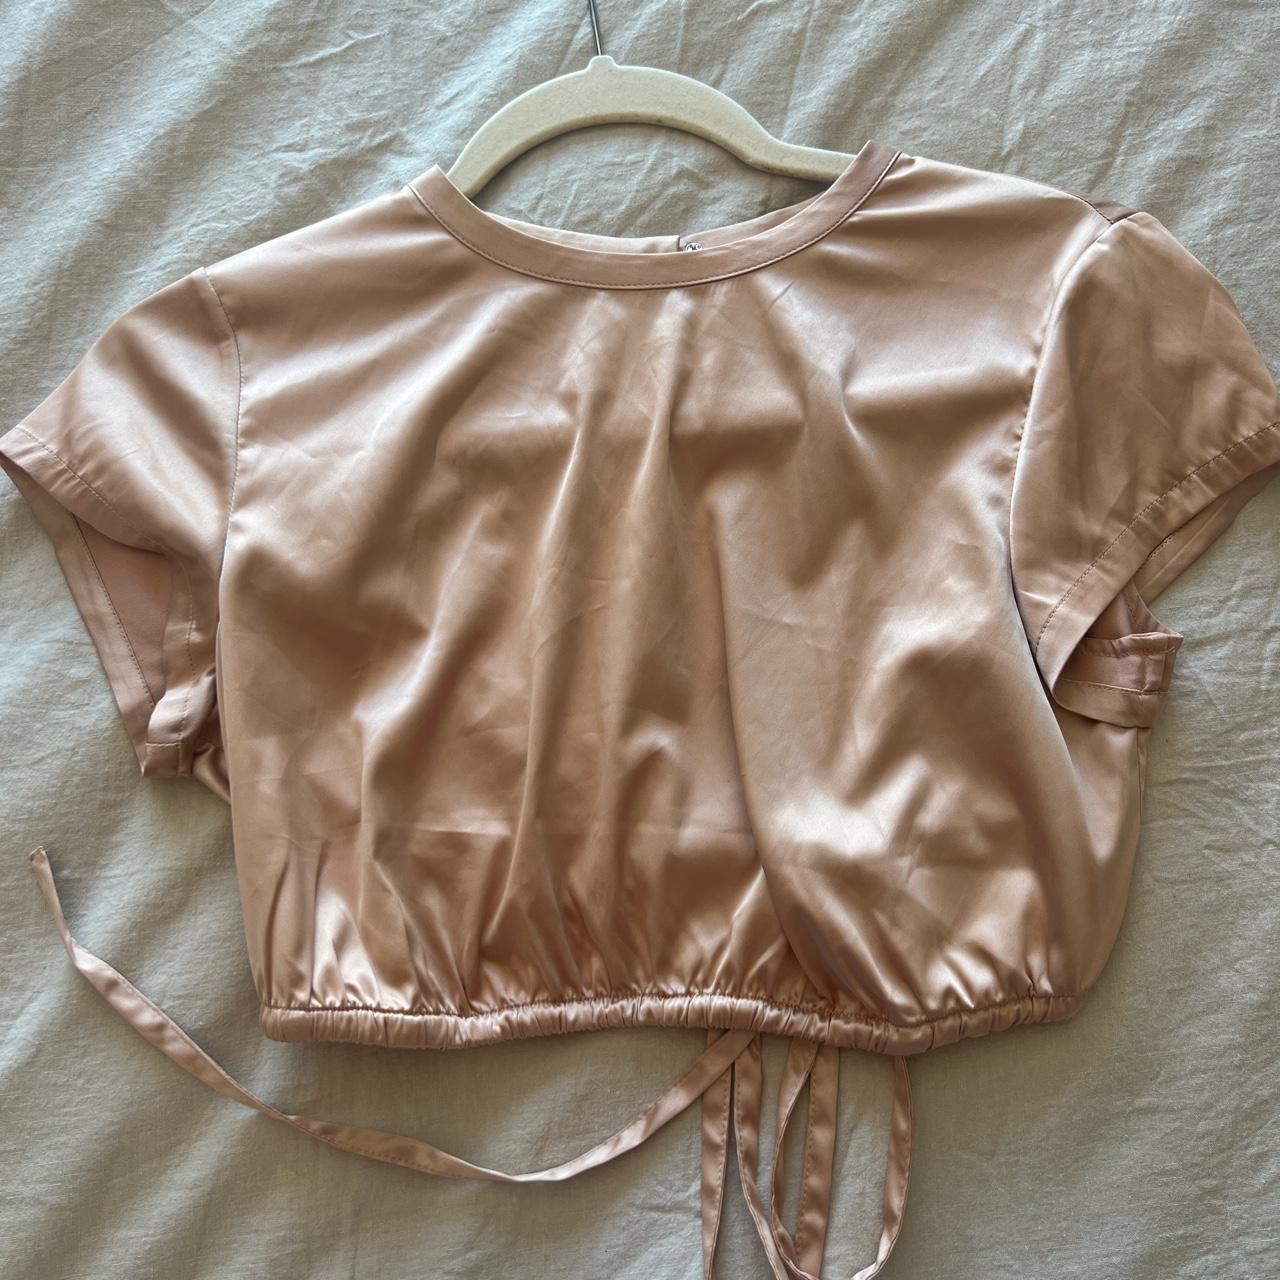 Skims brown tube top brand new but no tags - Depop